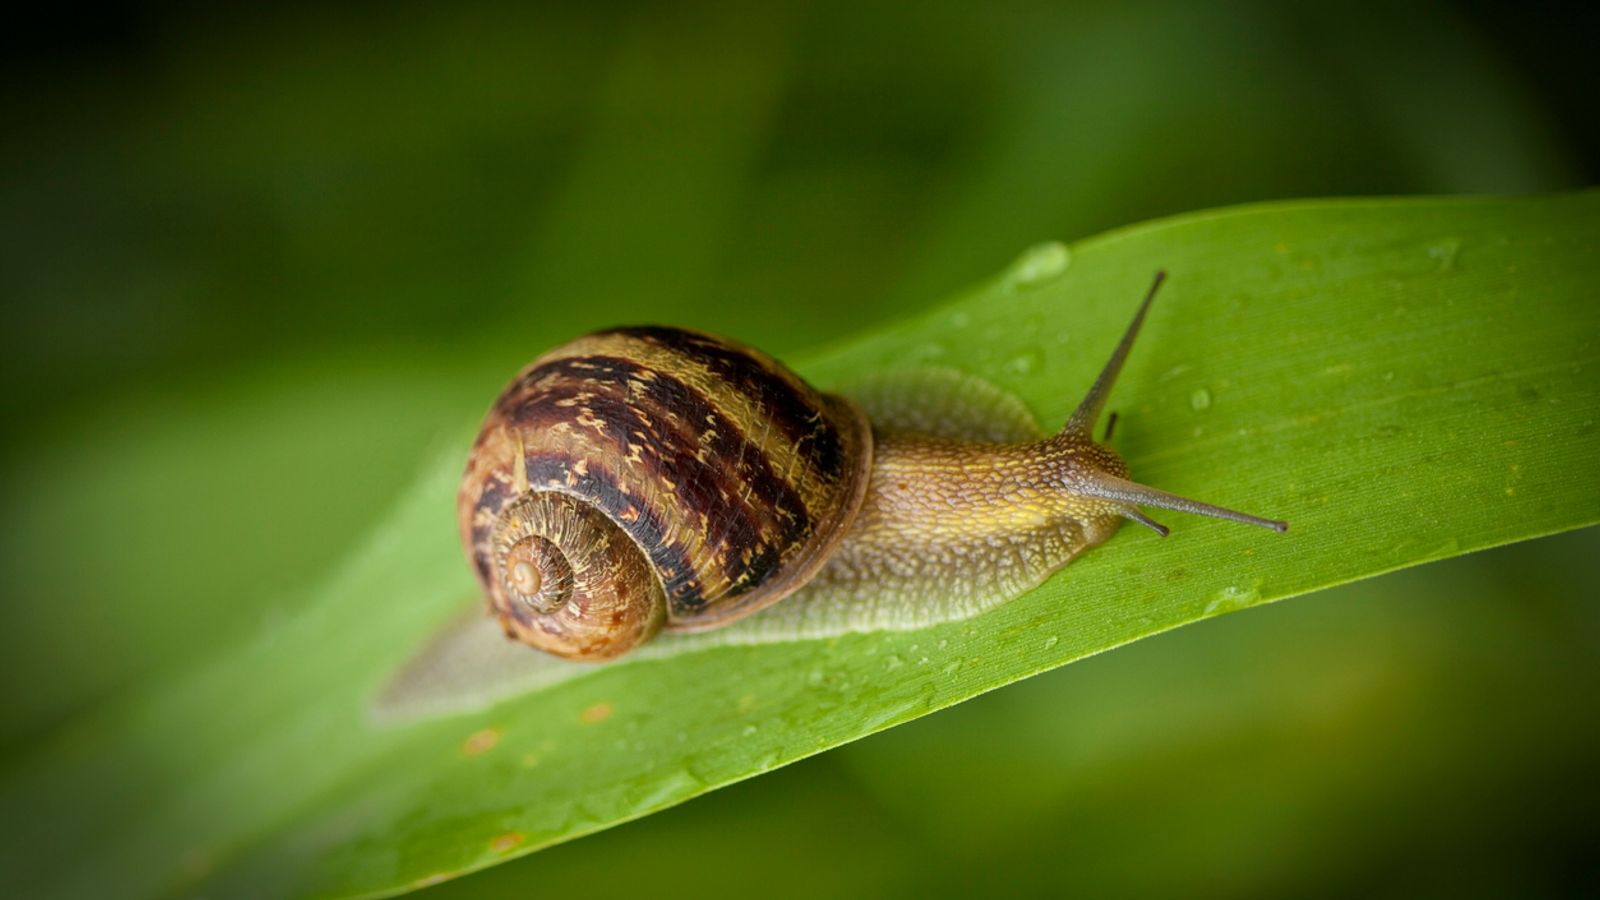 Britons should 'make friends' with slugs and snails in their gardens, charities say